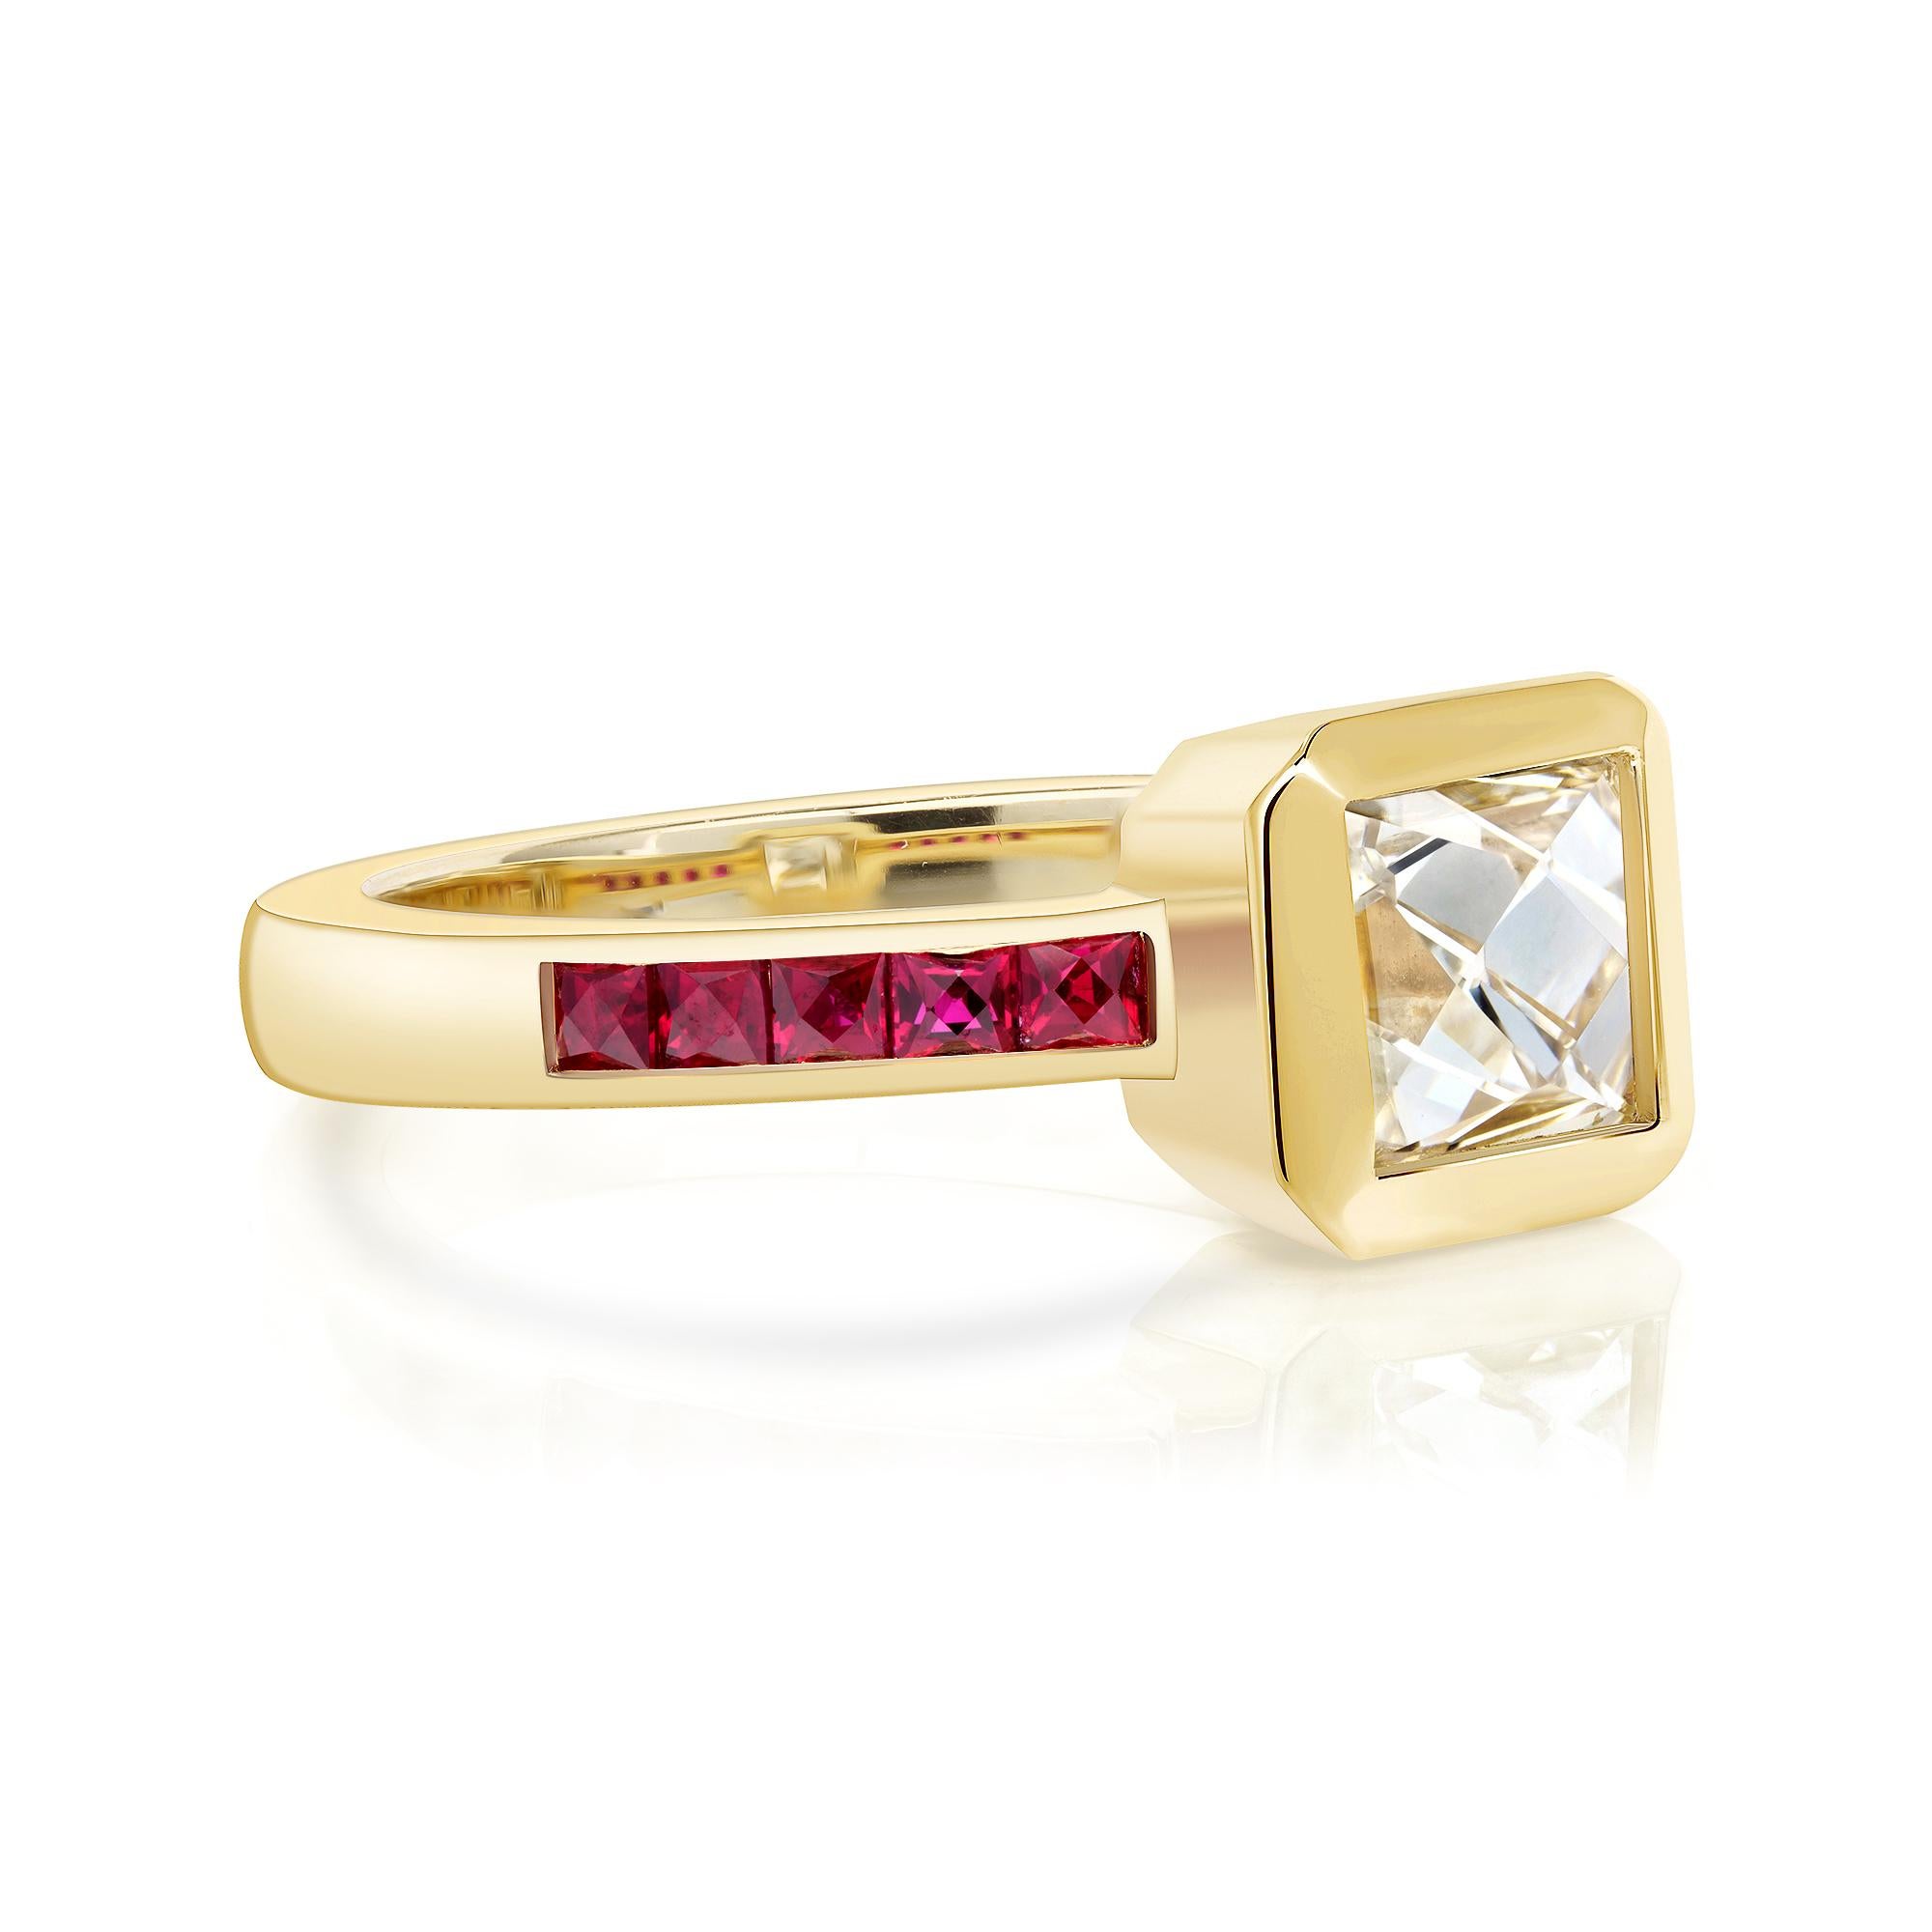 1.16ct G/VS2 GIA certified French cut diamond with 0.42ctw French cut ruby accent stones bezel set in a handcrafted 18K yellow gold mounting.